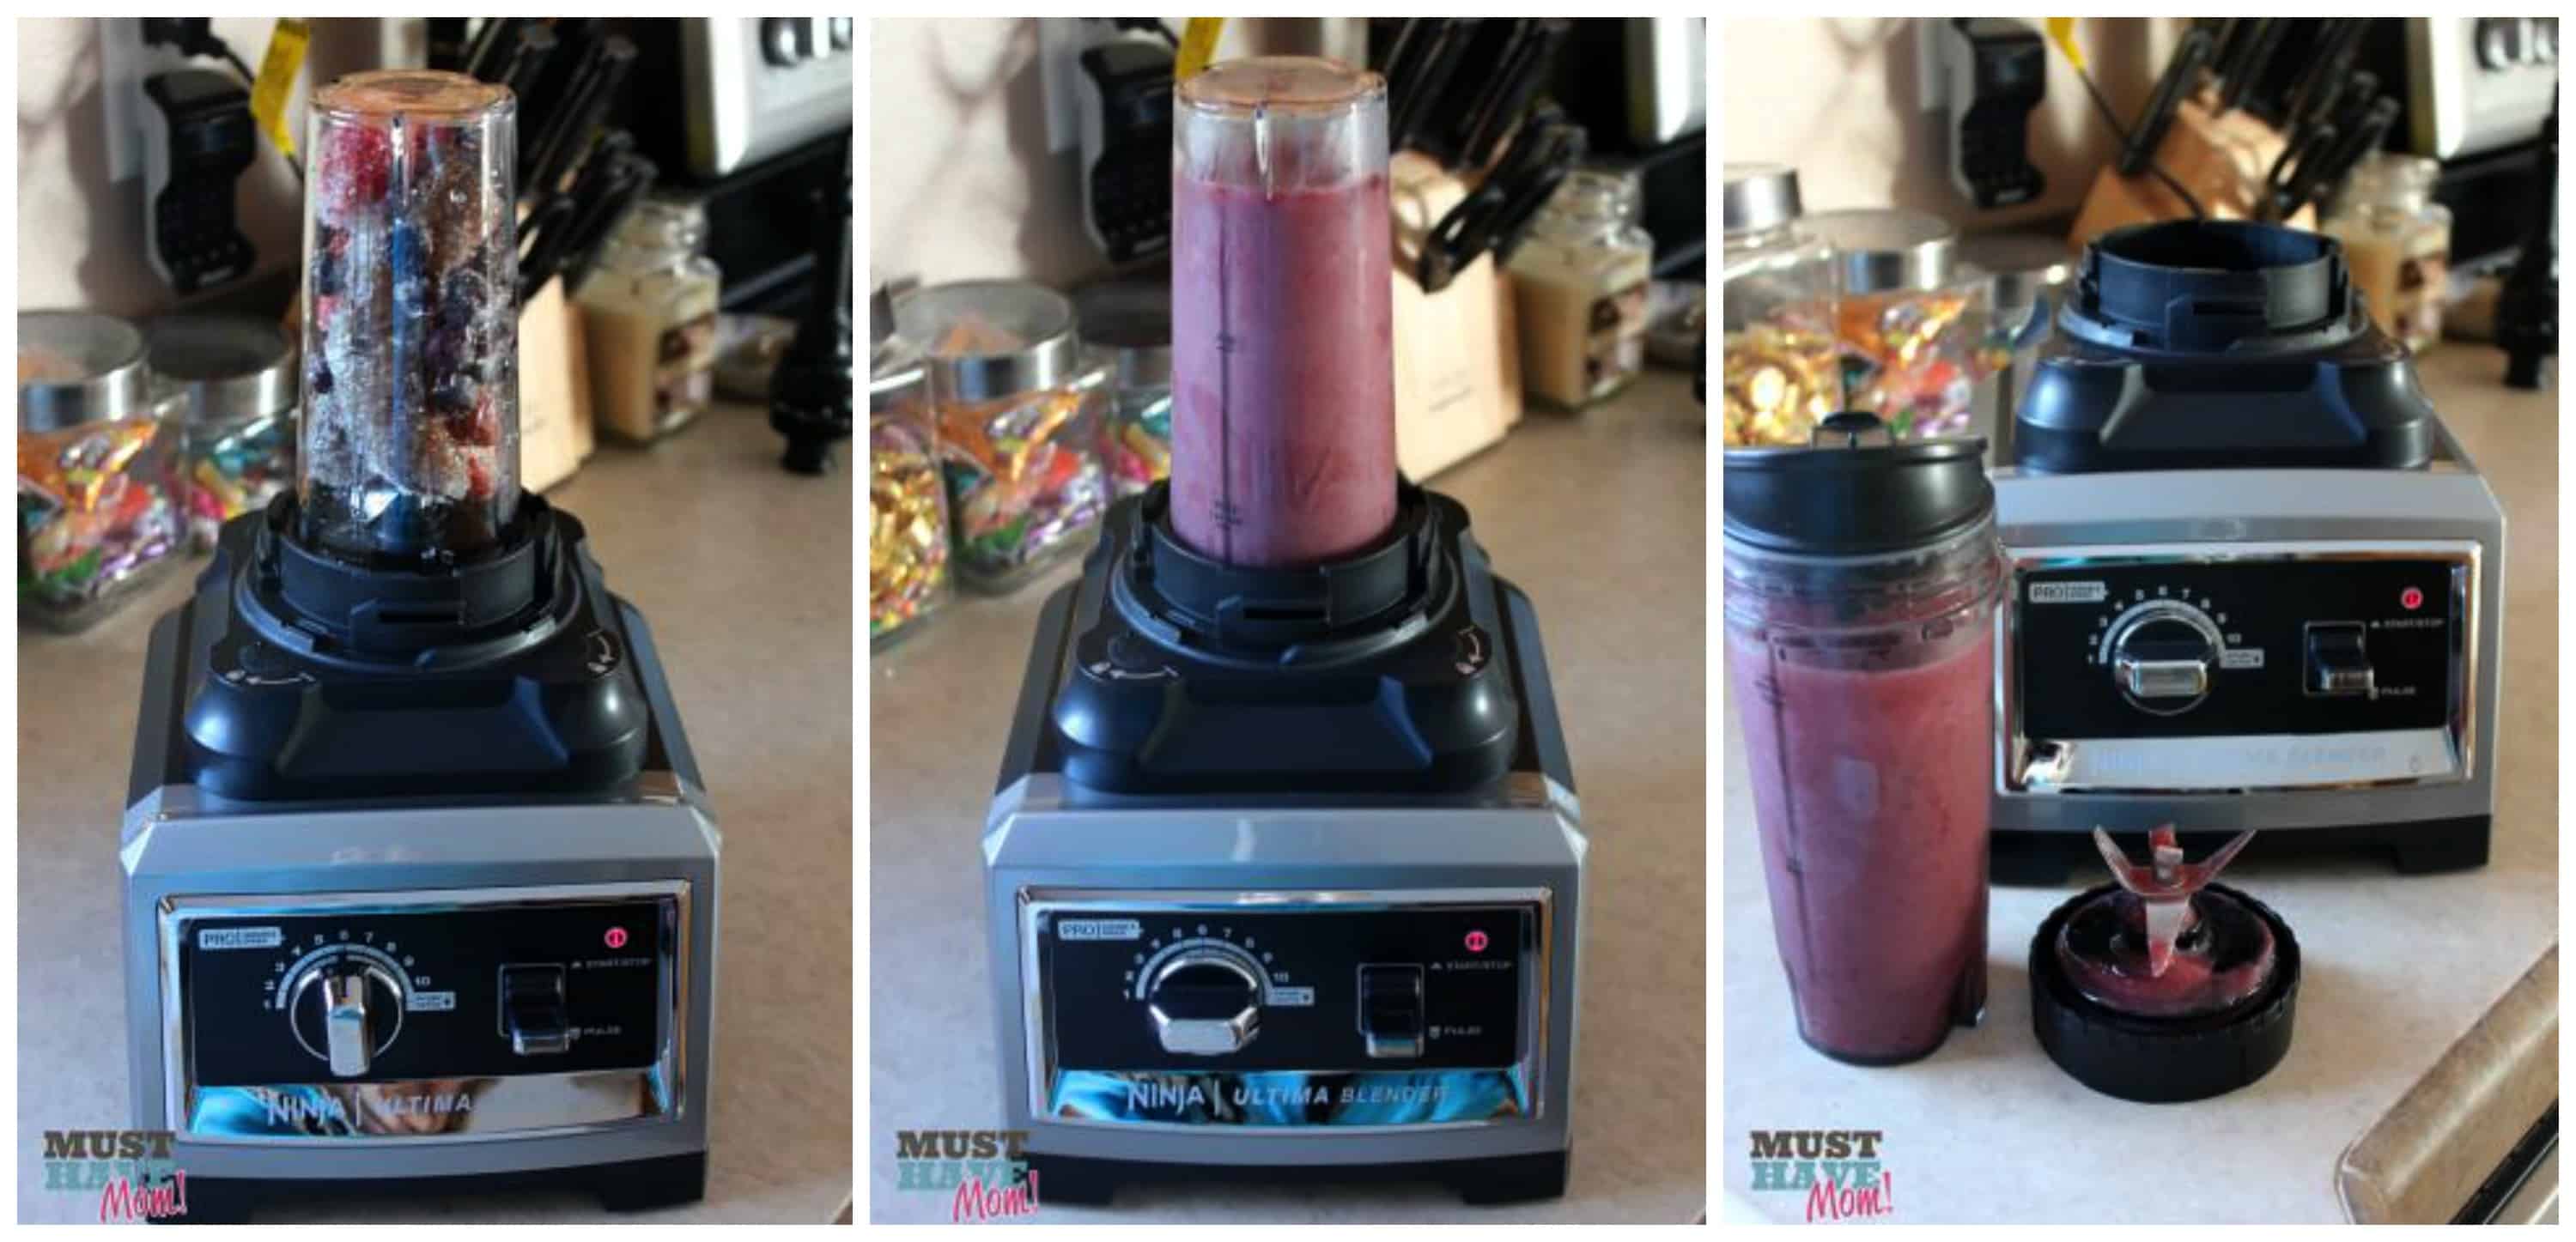 Easy fruit smoothies with the Ninja Ultima blender